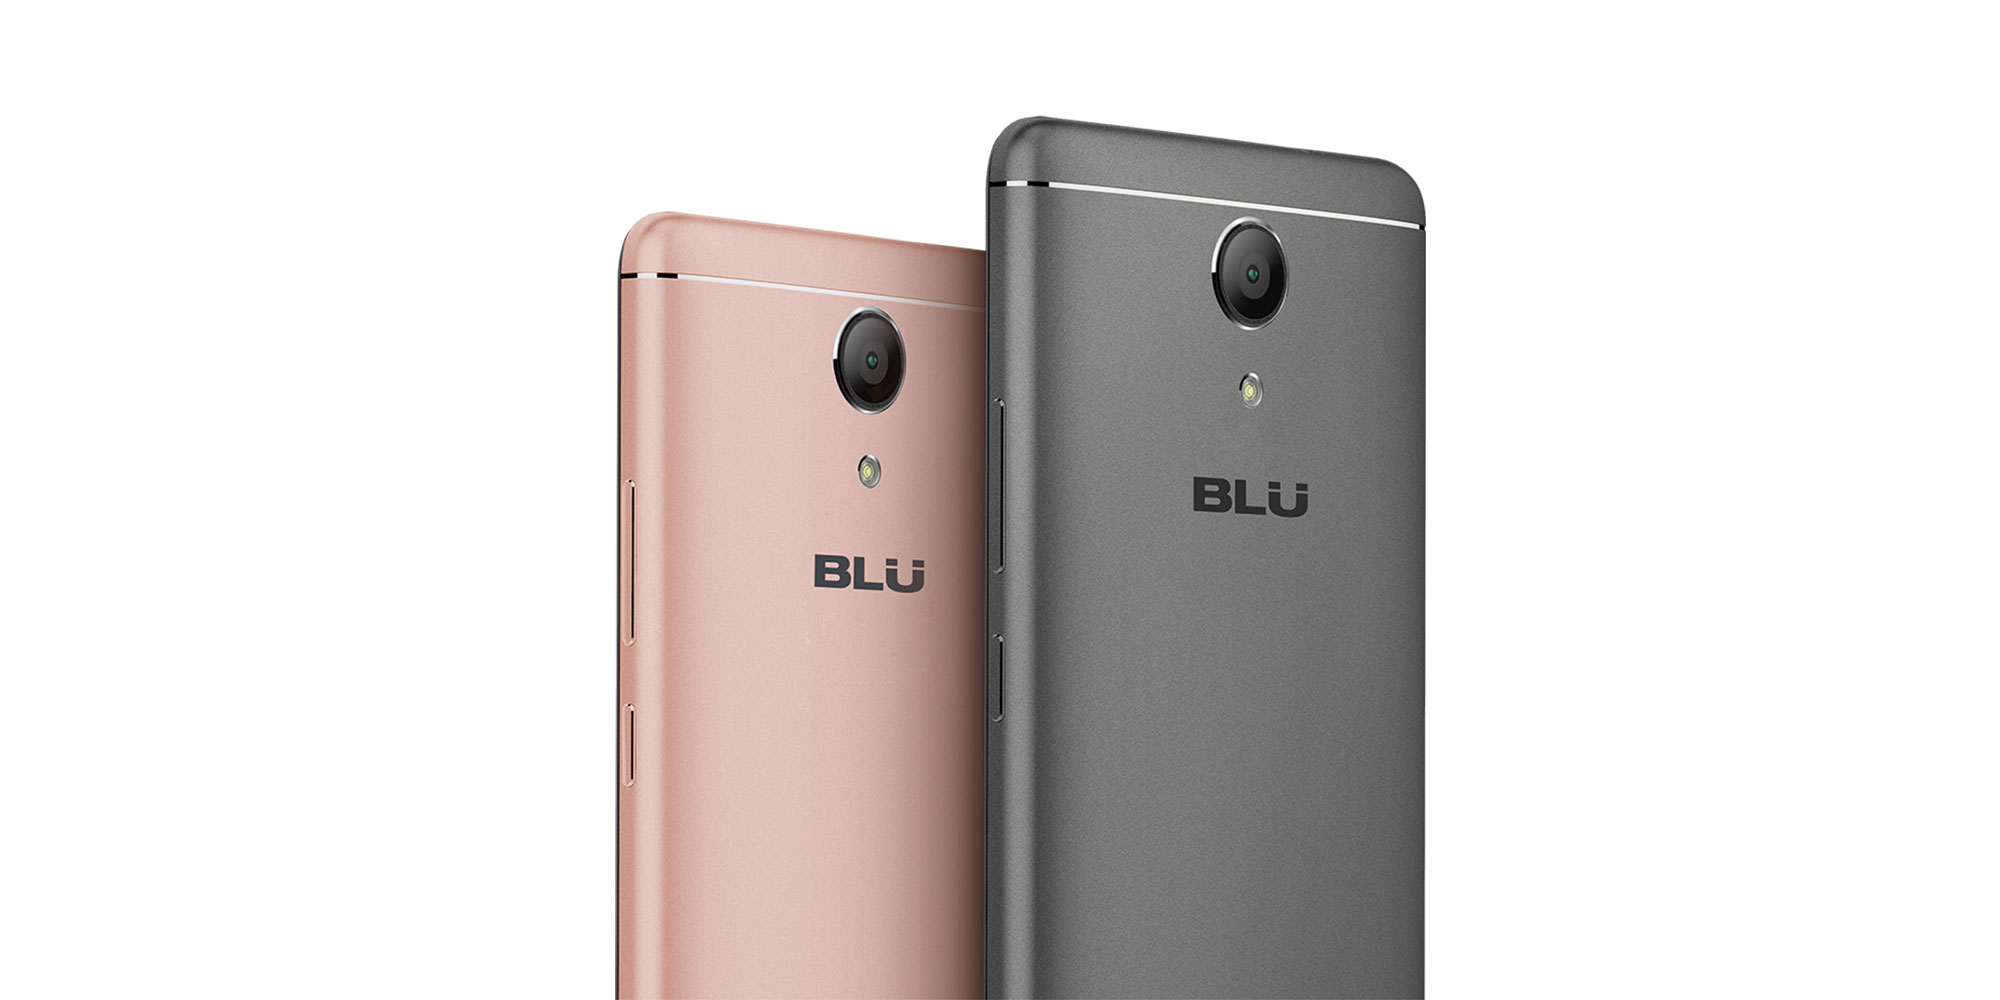 can not update blu life one x from lollipop to marshmallow zip file